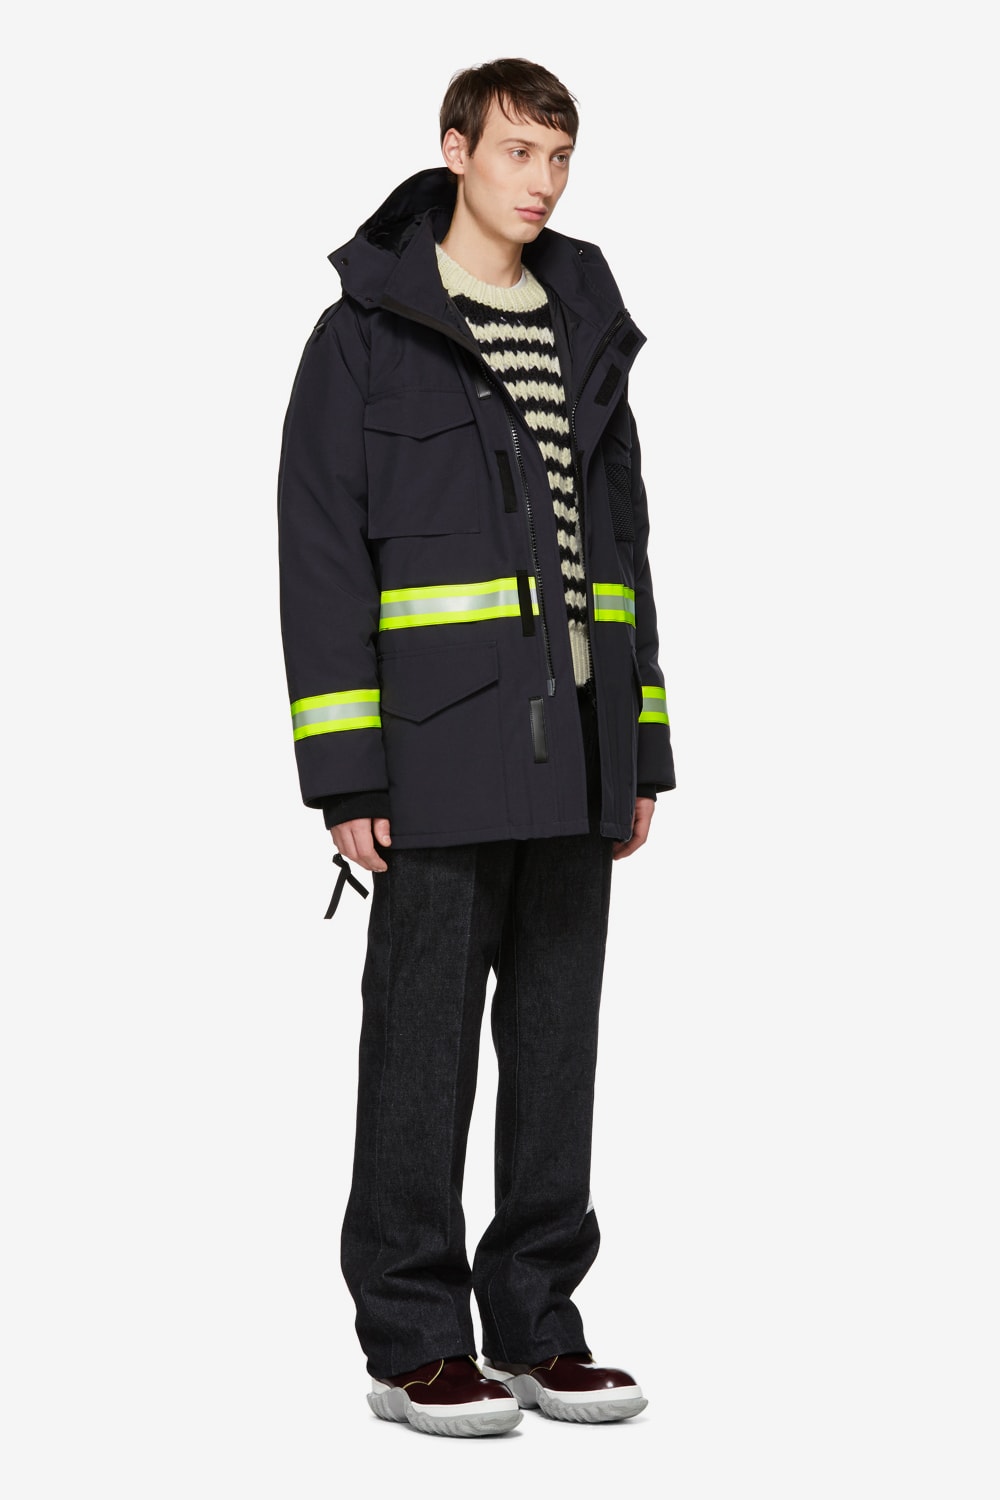 Junya Watanabe Canada Goose Fall Winter 2018 Jackets Outerwear Gore Windstopper reflective coat down parka double layer edition hooded